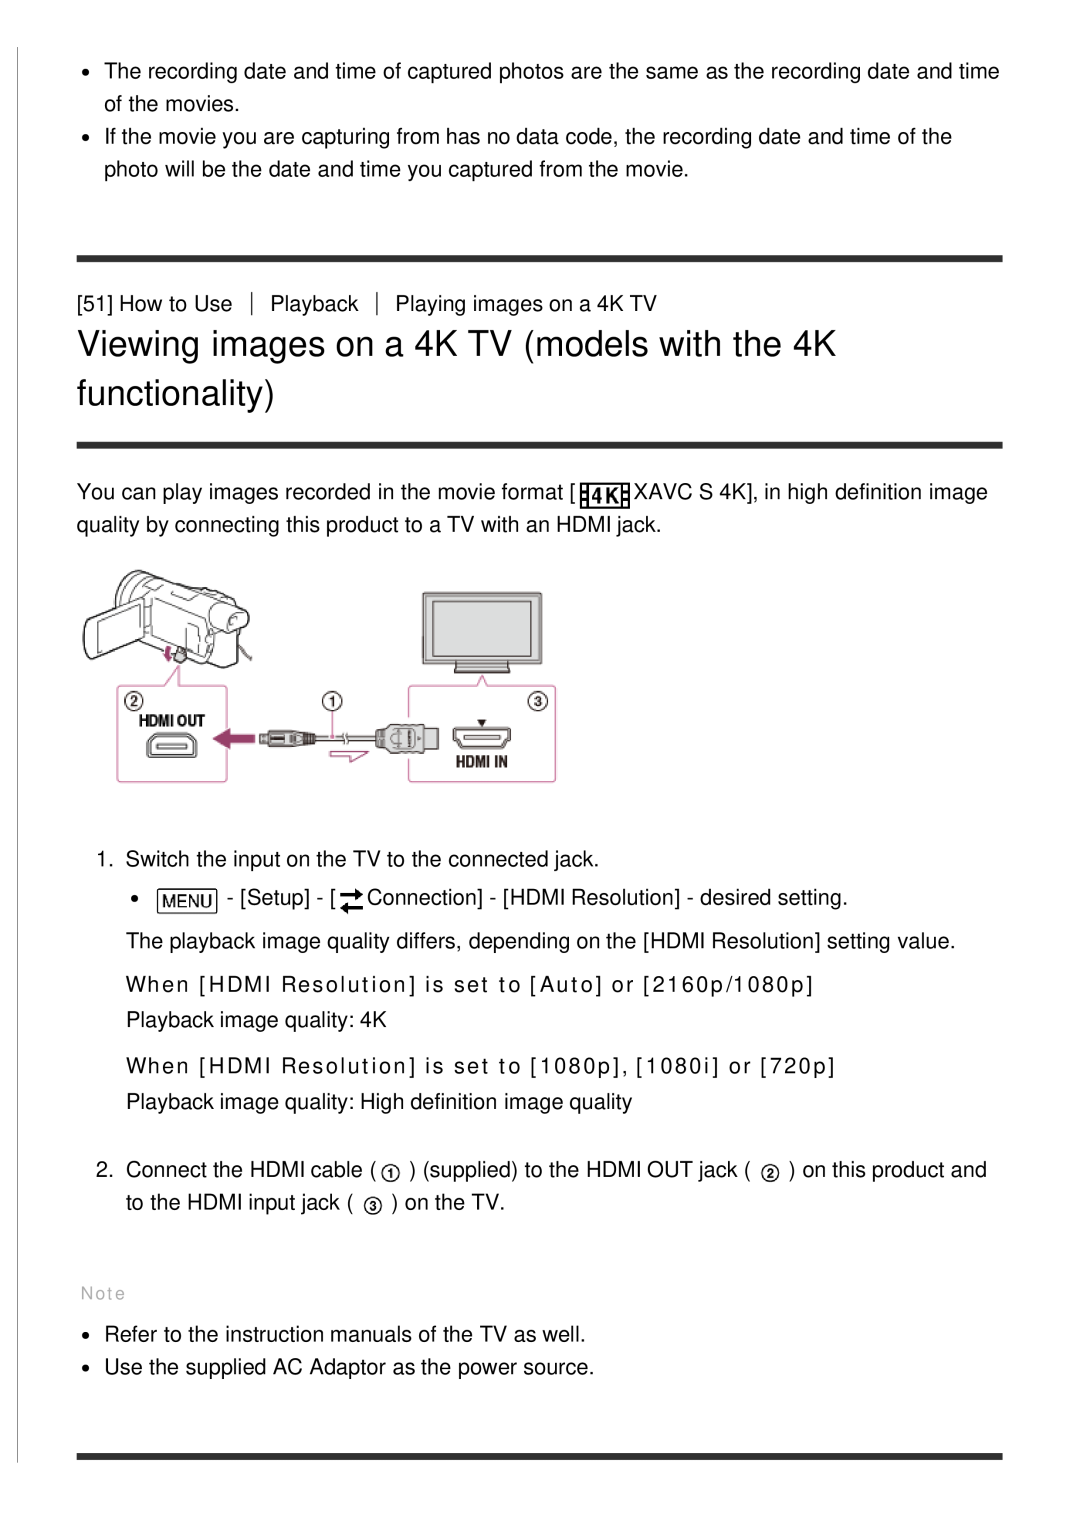 Sony HDR-CX900E, FDR-AX100E manual Viewing images on a 4K TV models with the 4K functionality 